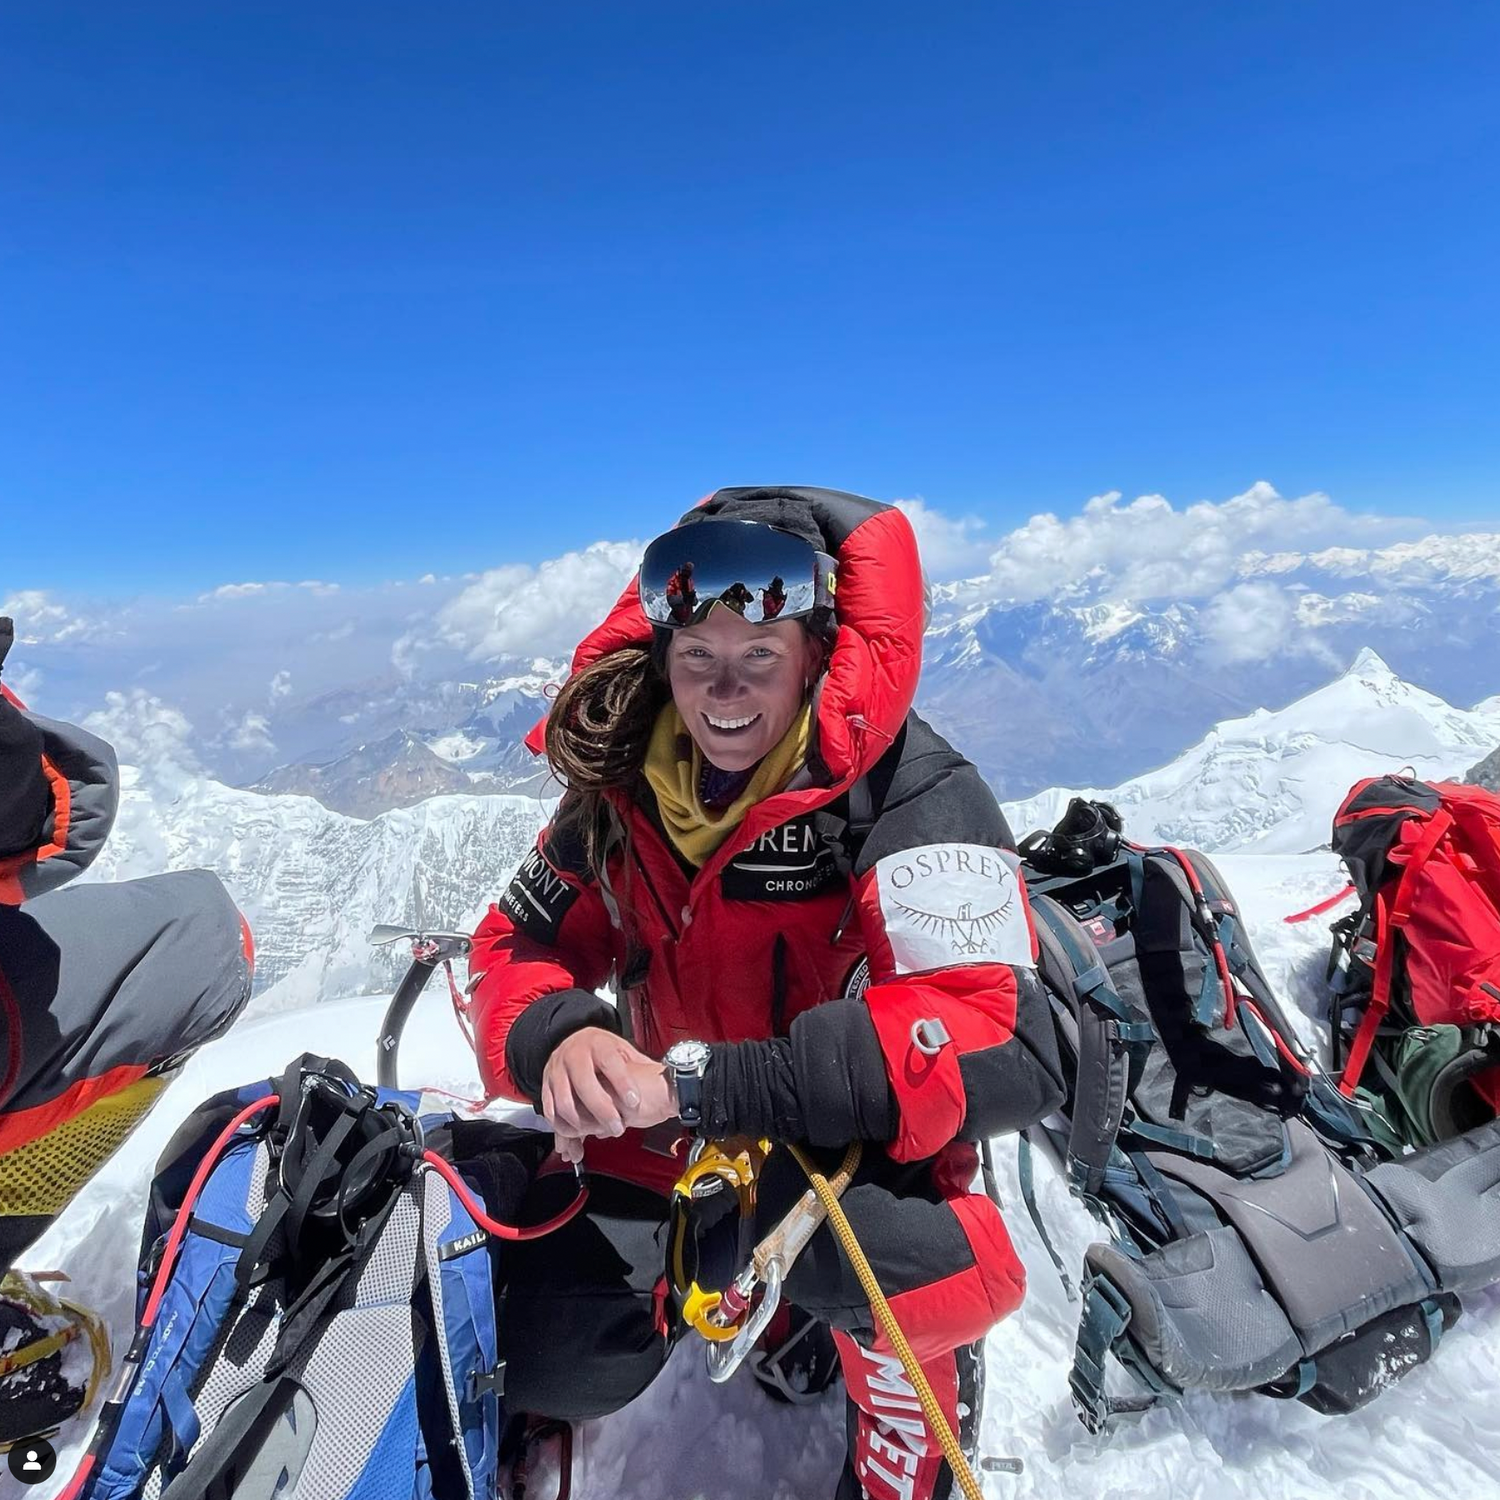 Bremont 14 Peaks: Phase 1 completed in record time